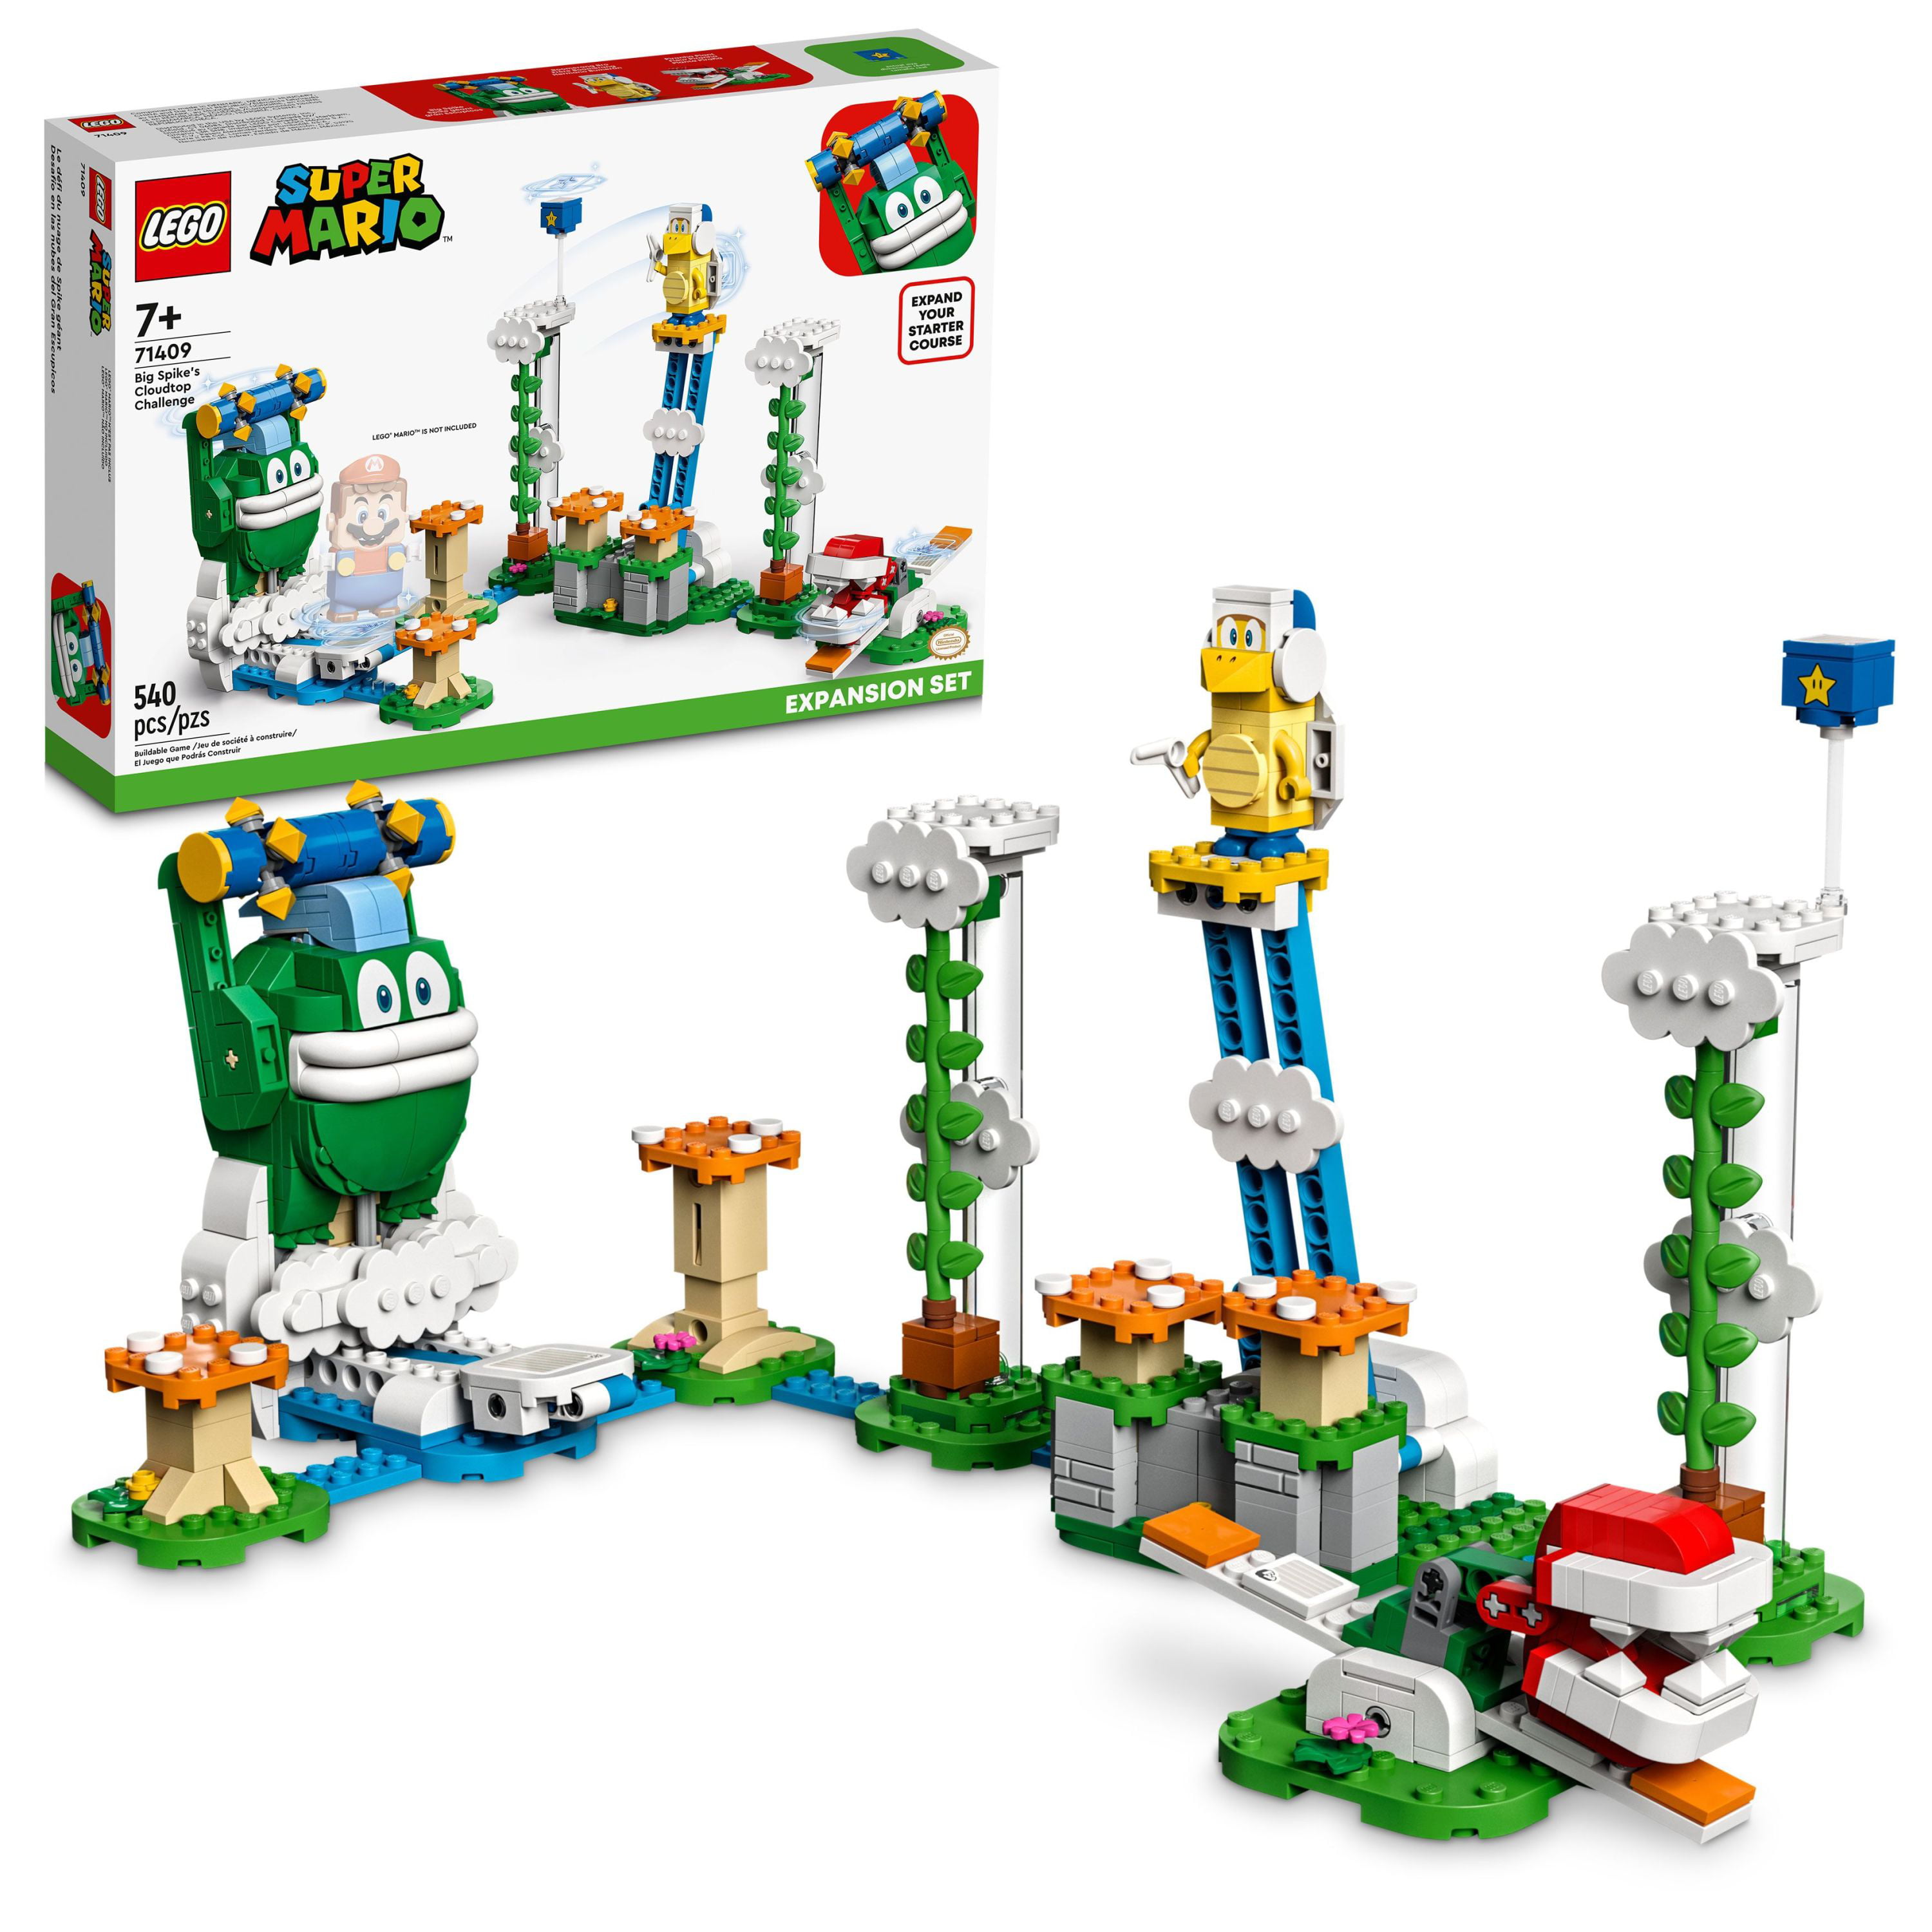 540-Piece Lego Super Mario Big Spike’s Cloudtop Challenge Expansion Building Set w/ 3 Figures (71409) $40 & More + Free Shipping